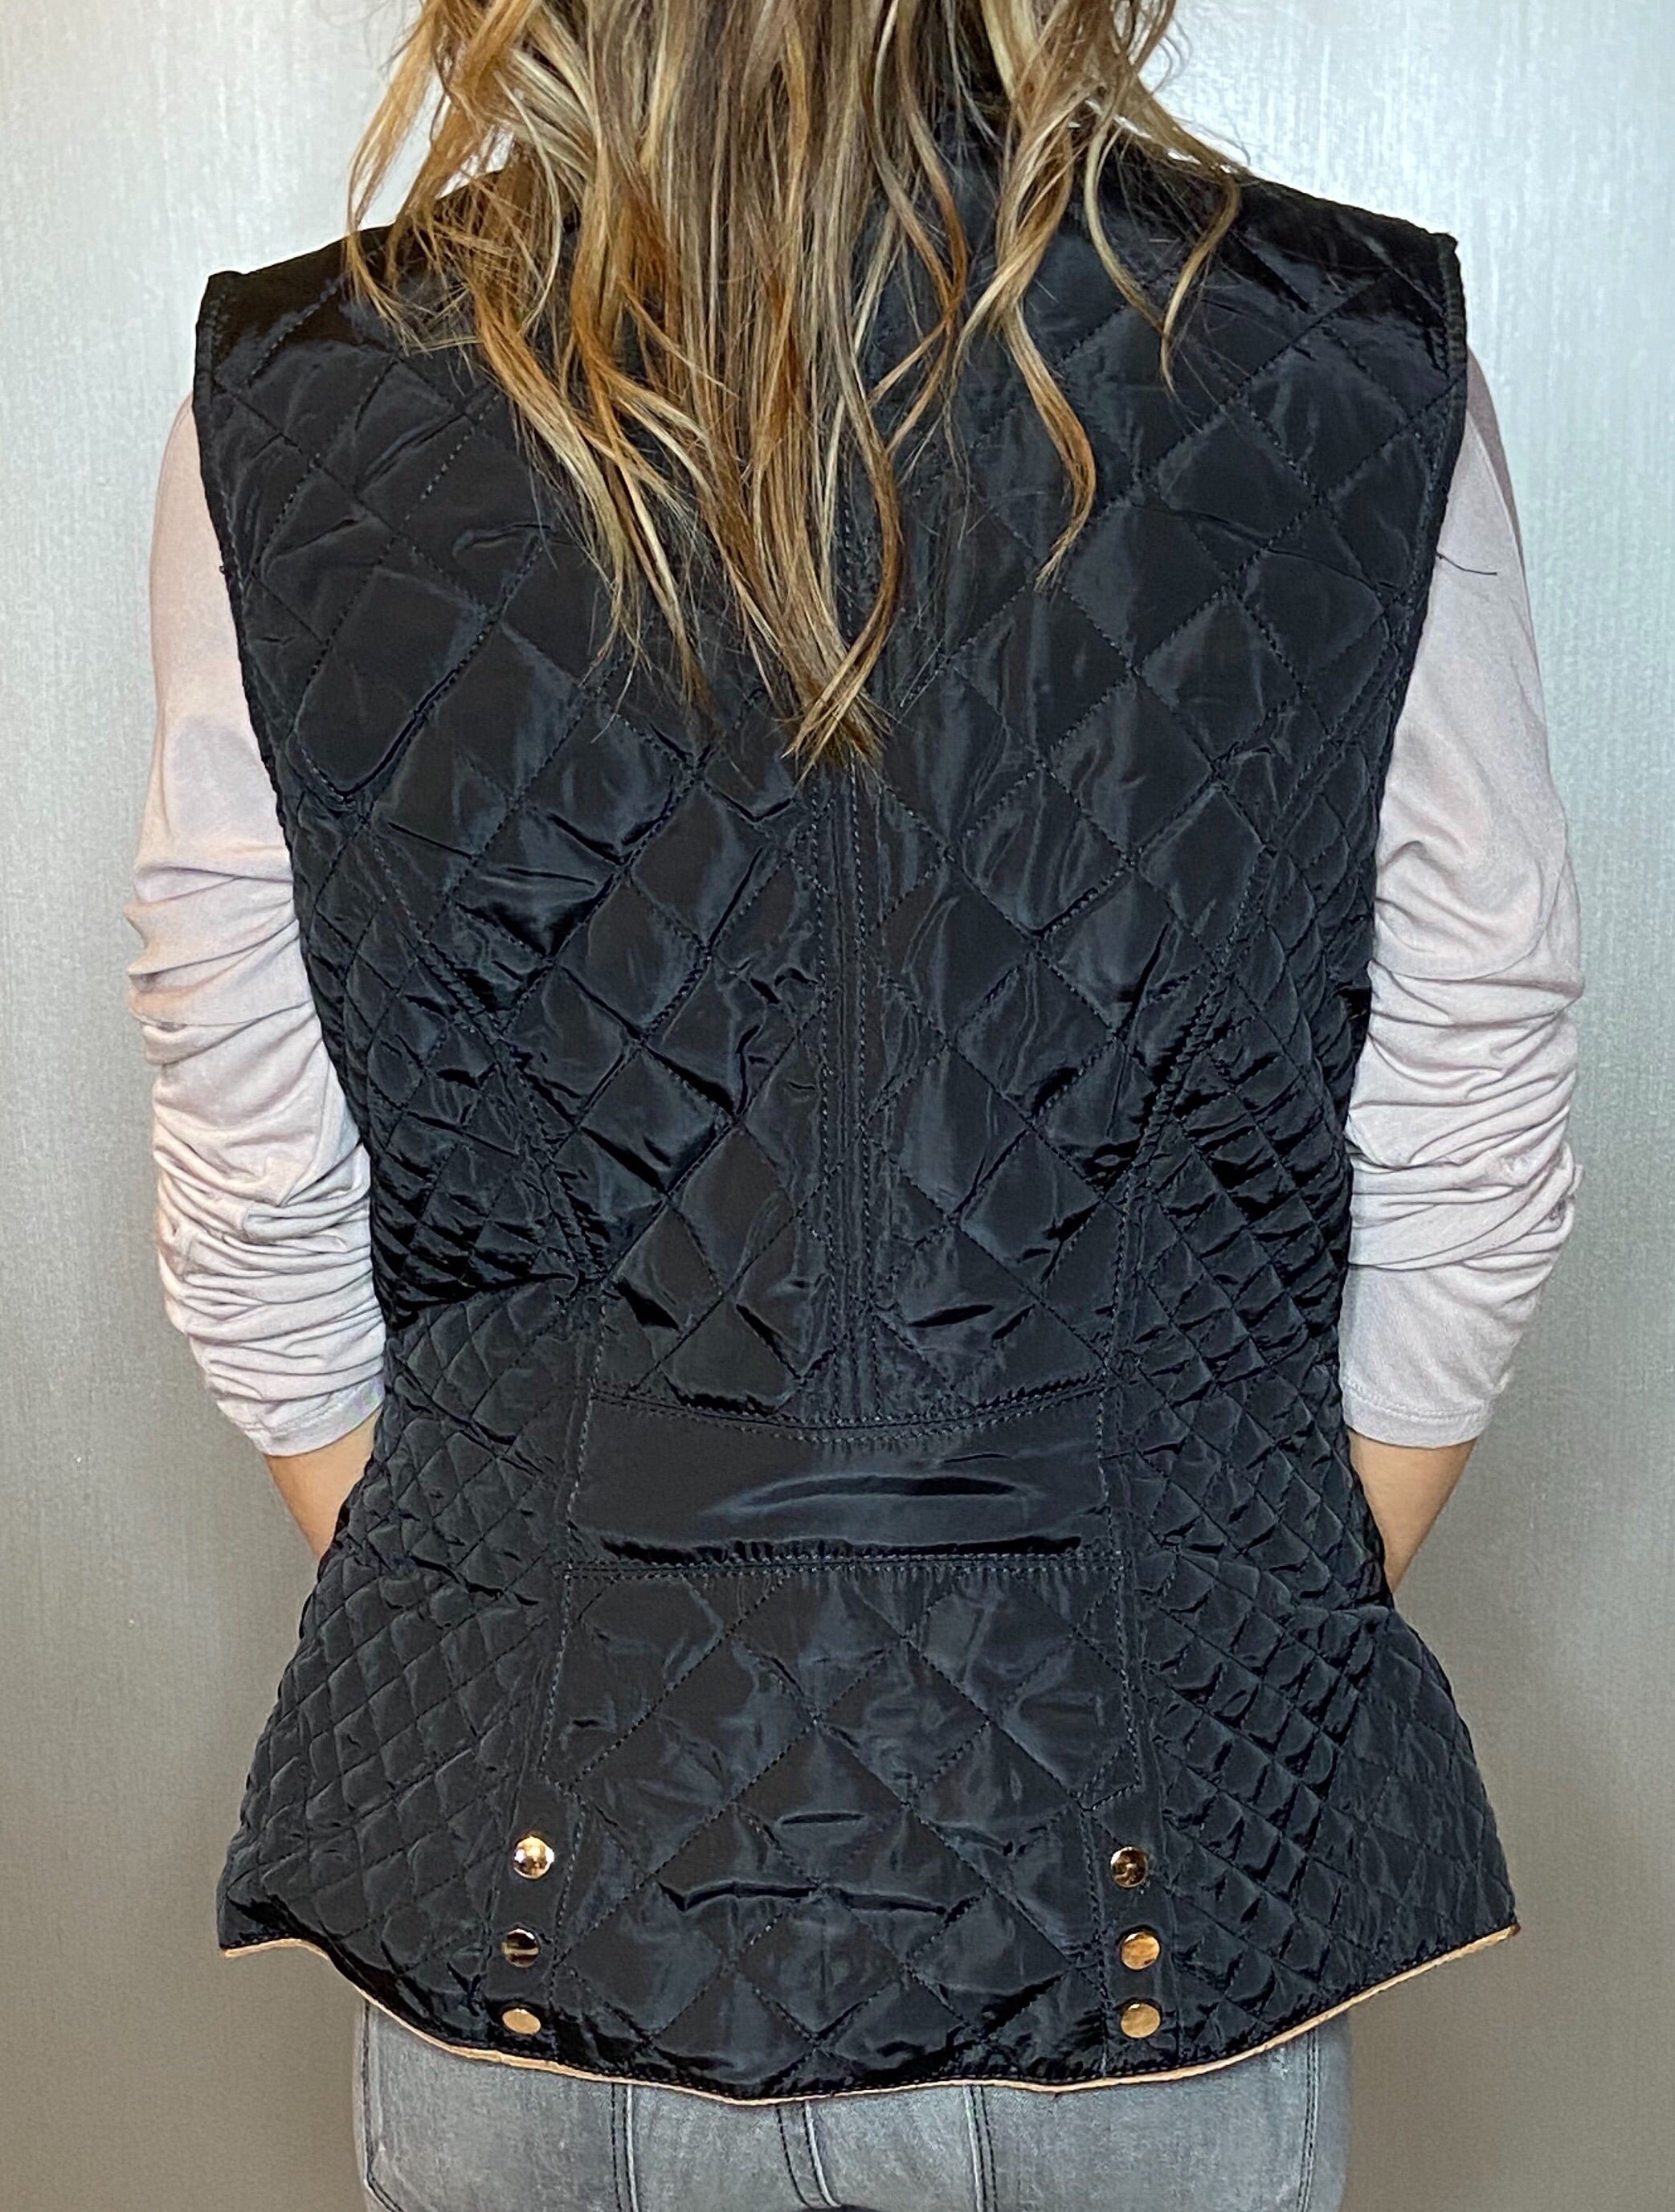 Fur lined, quilted vest